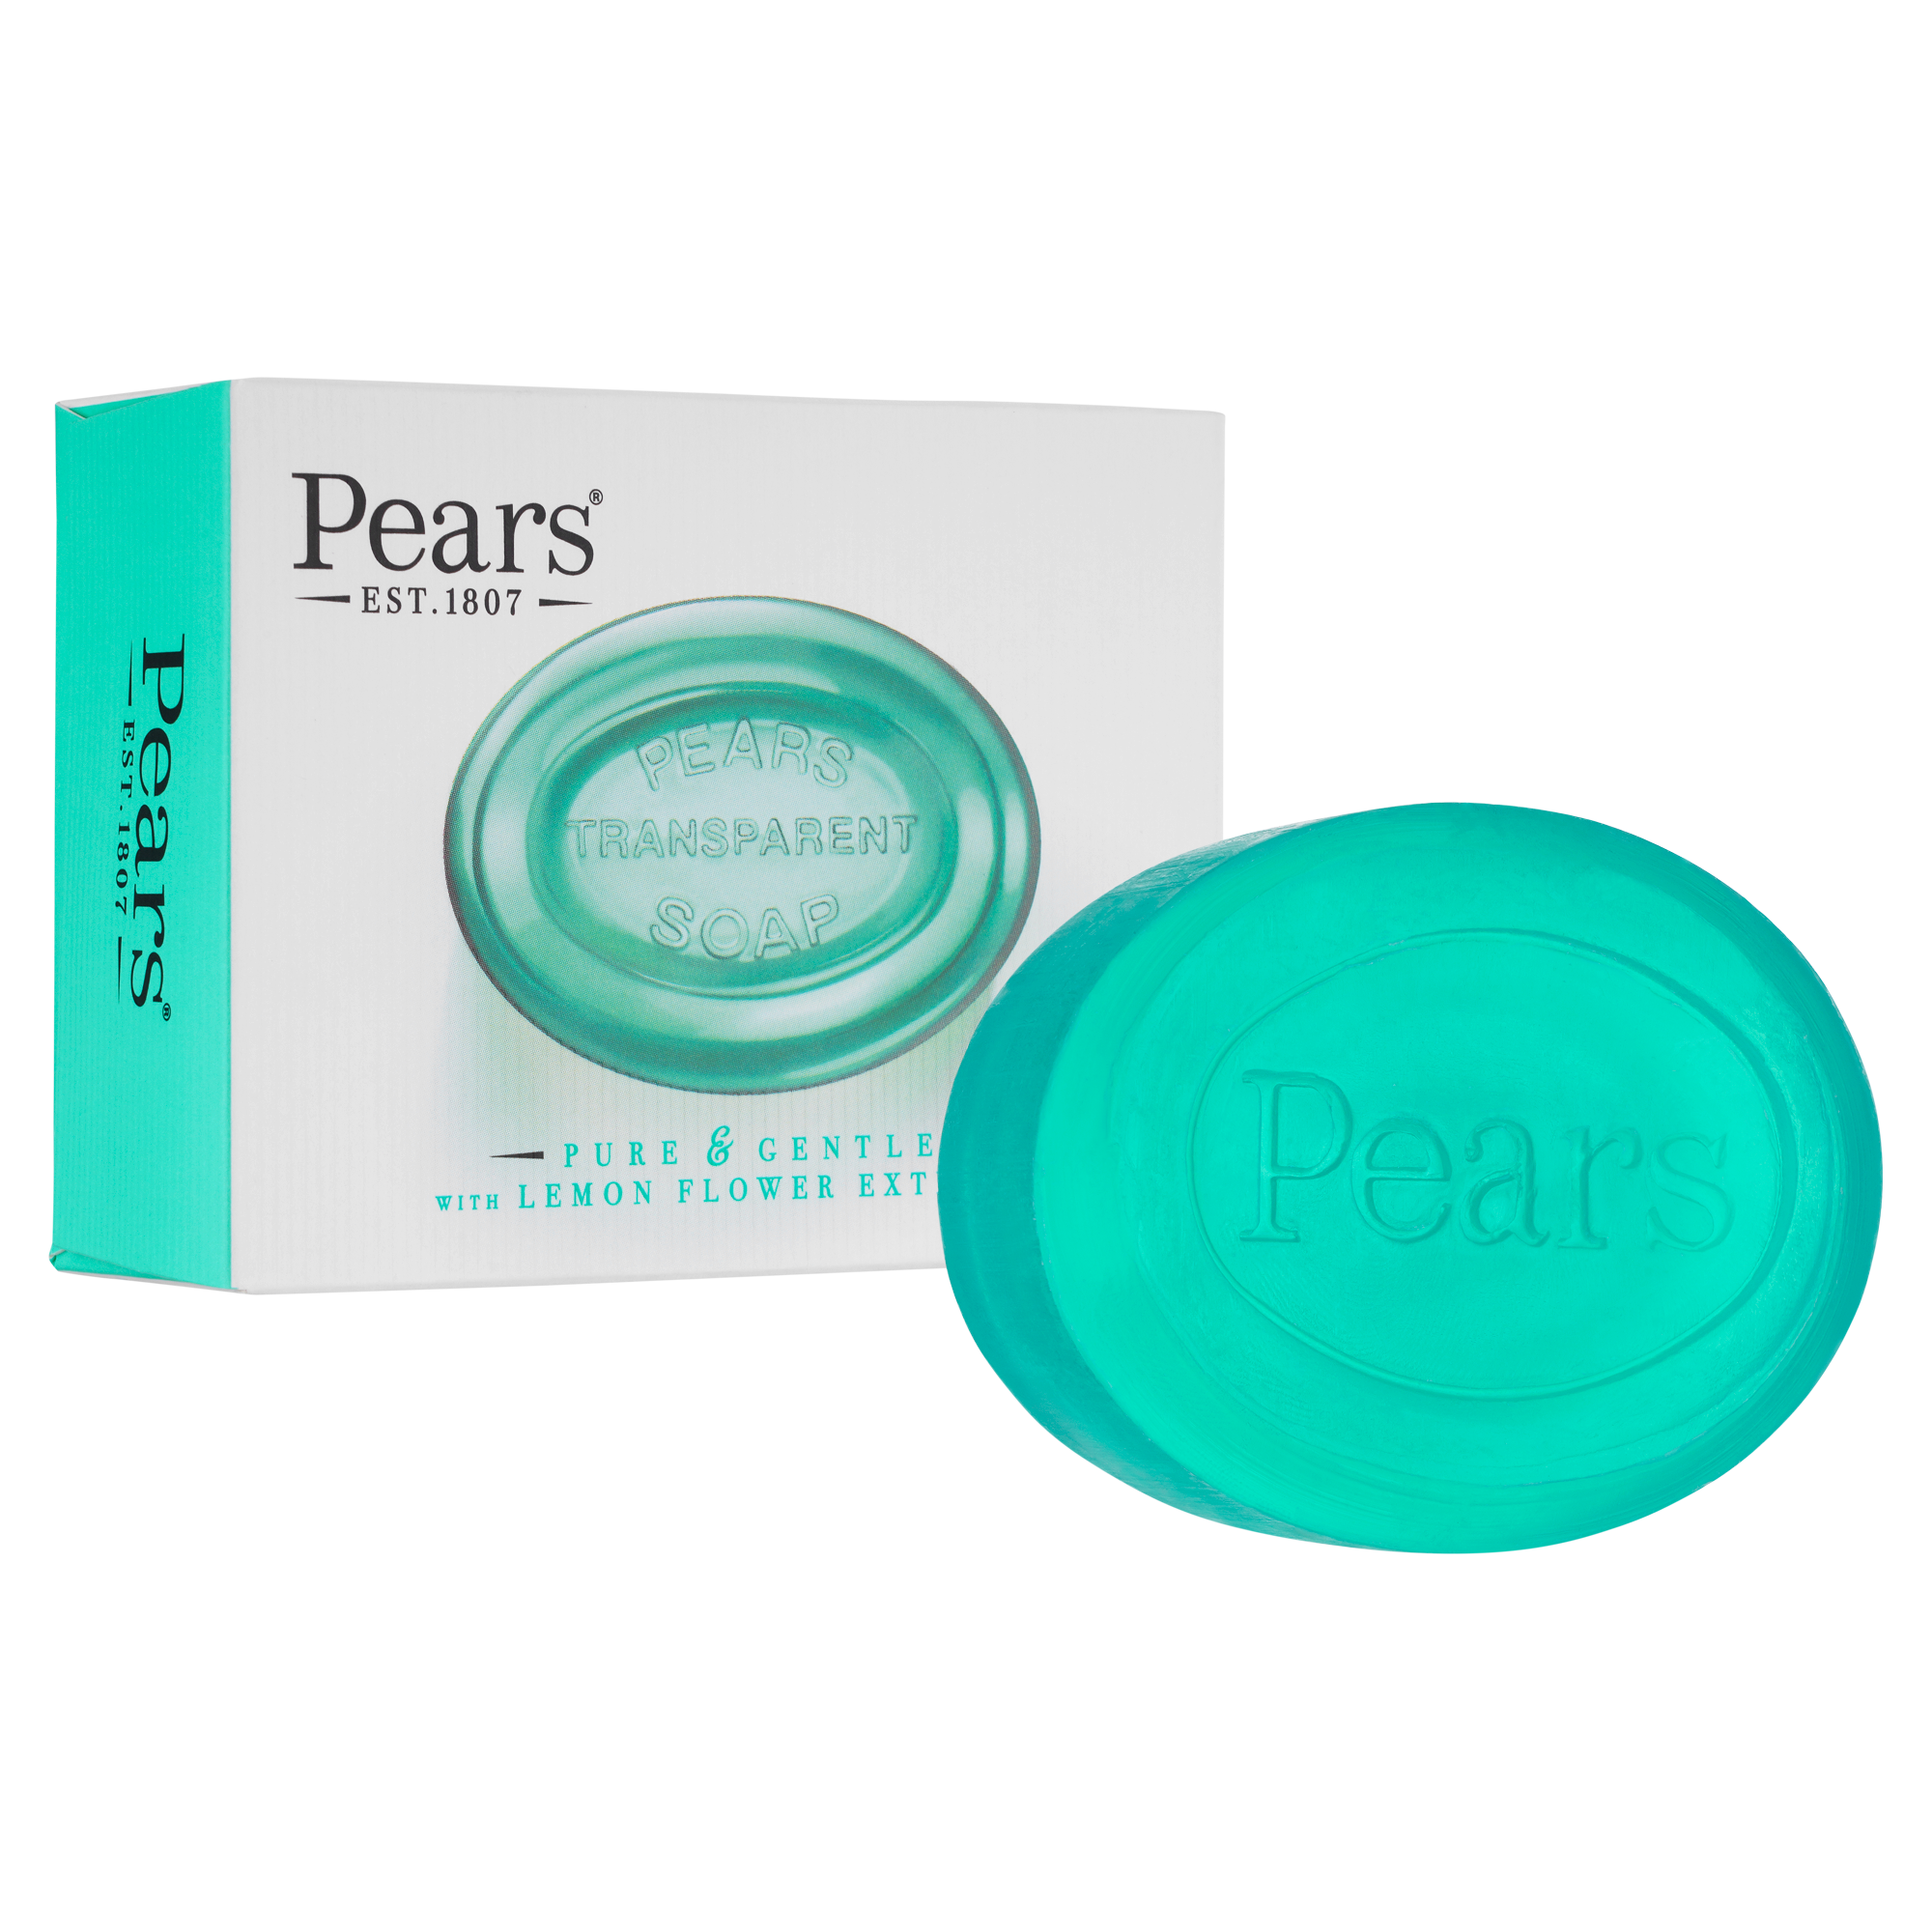 Pears Transparent Soap with Lemon Flower Extracts 100g